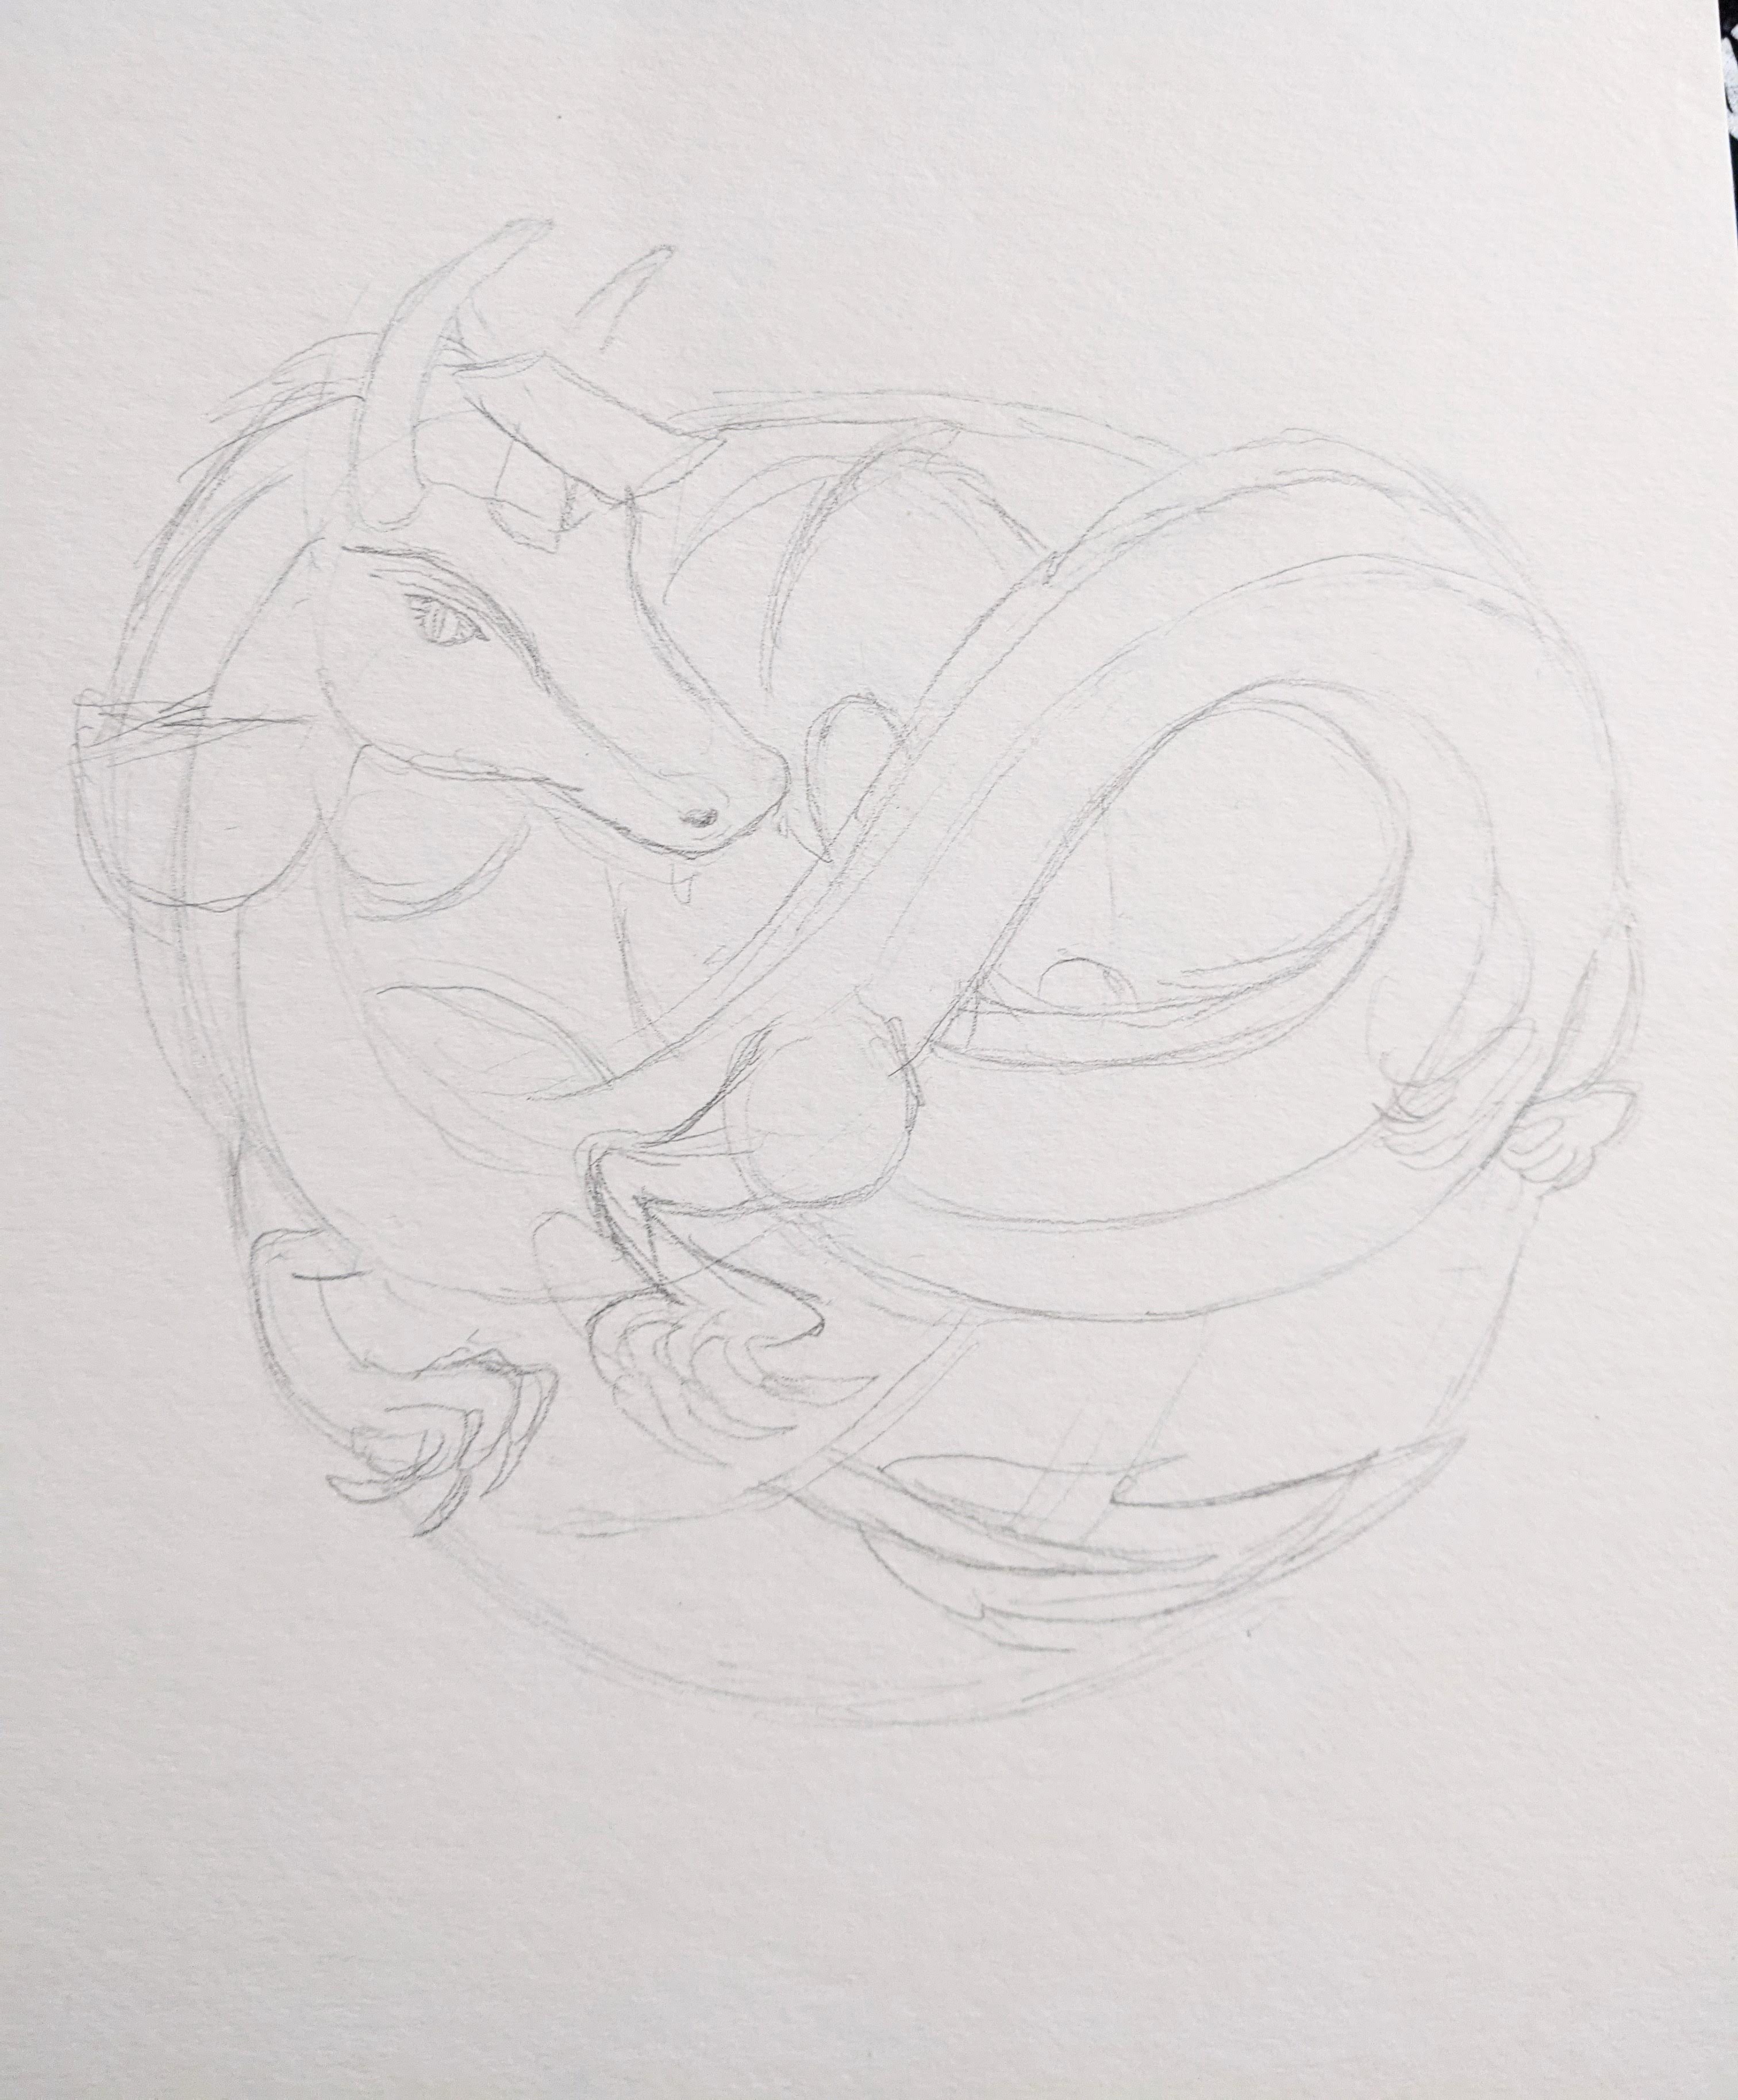 pencil sketch of a winding snaking dragon with a chinese scholar hat